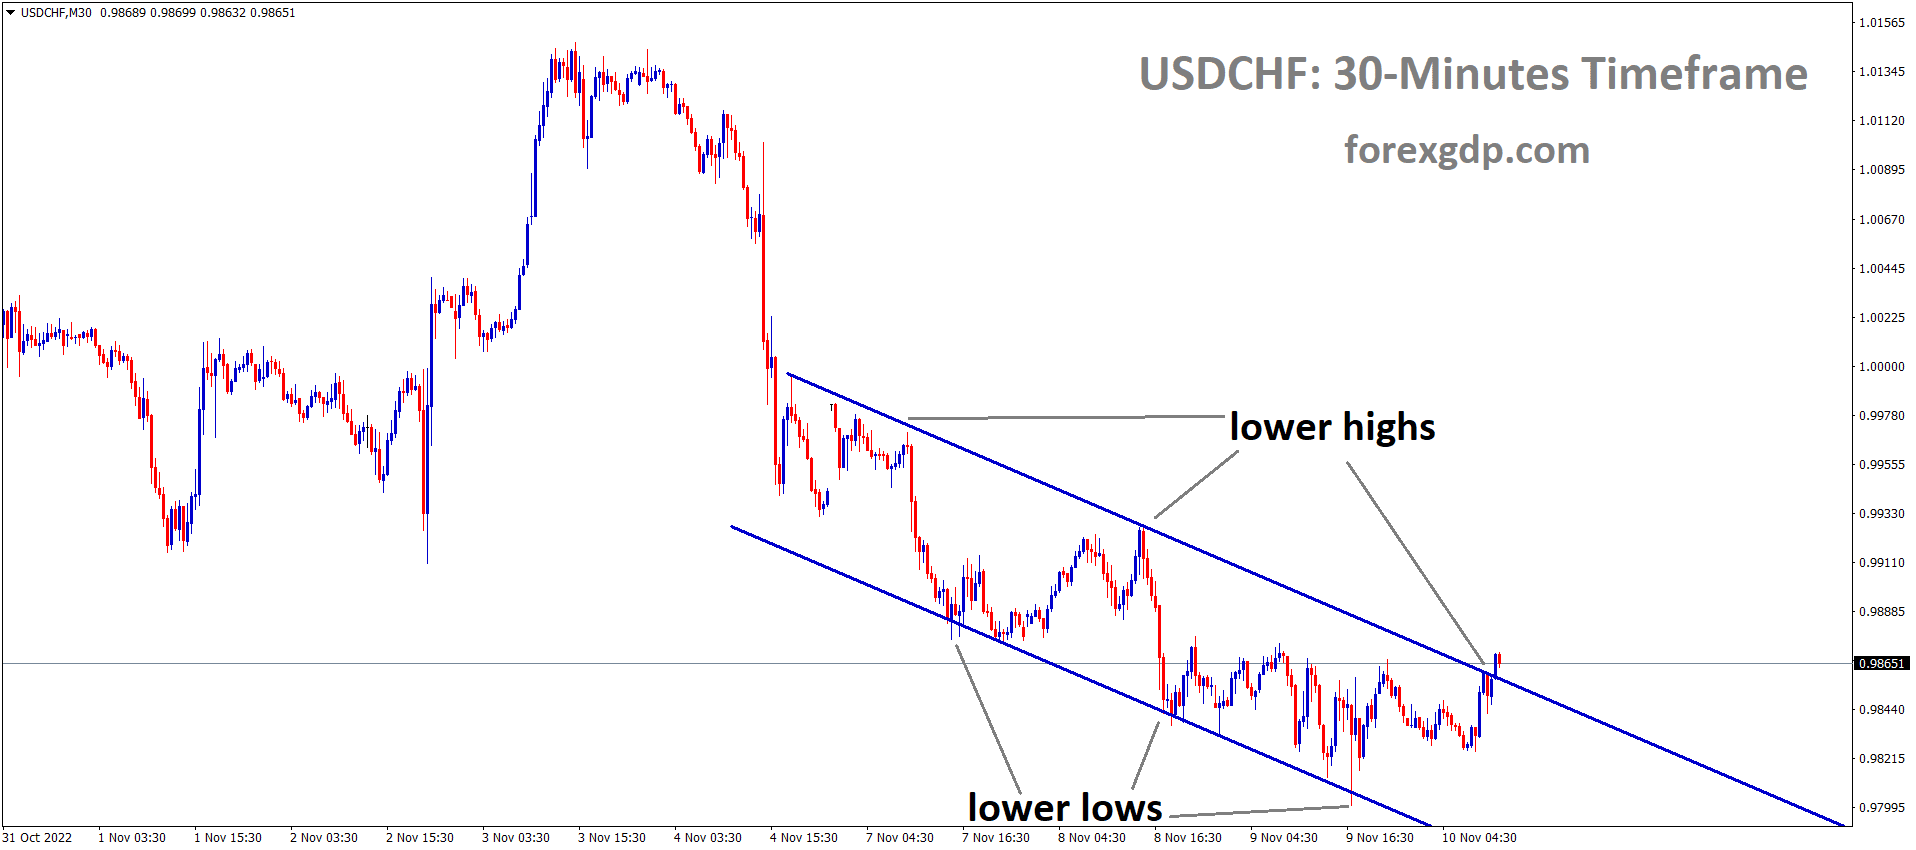 USDCHF is moving in the Descending channel and the market has reached the lower high area of the channel